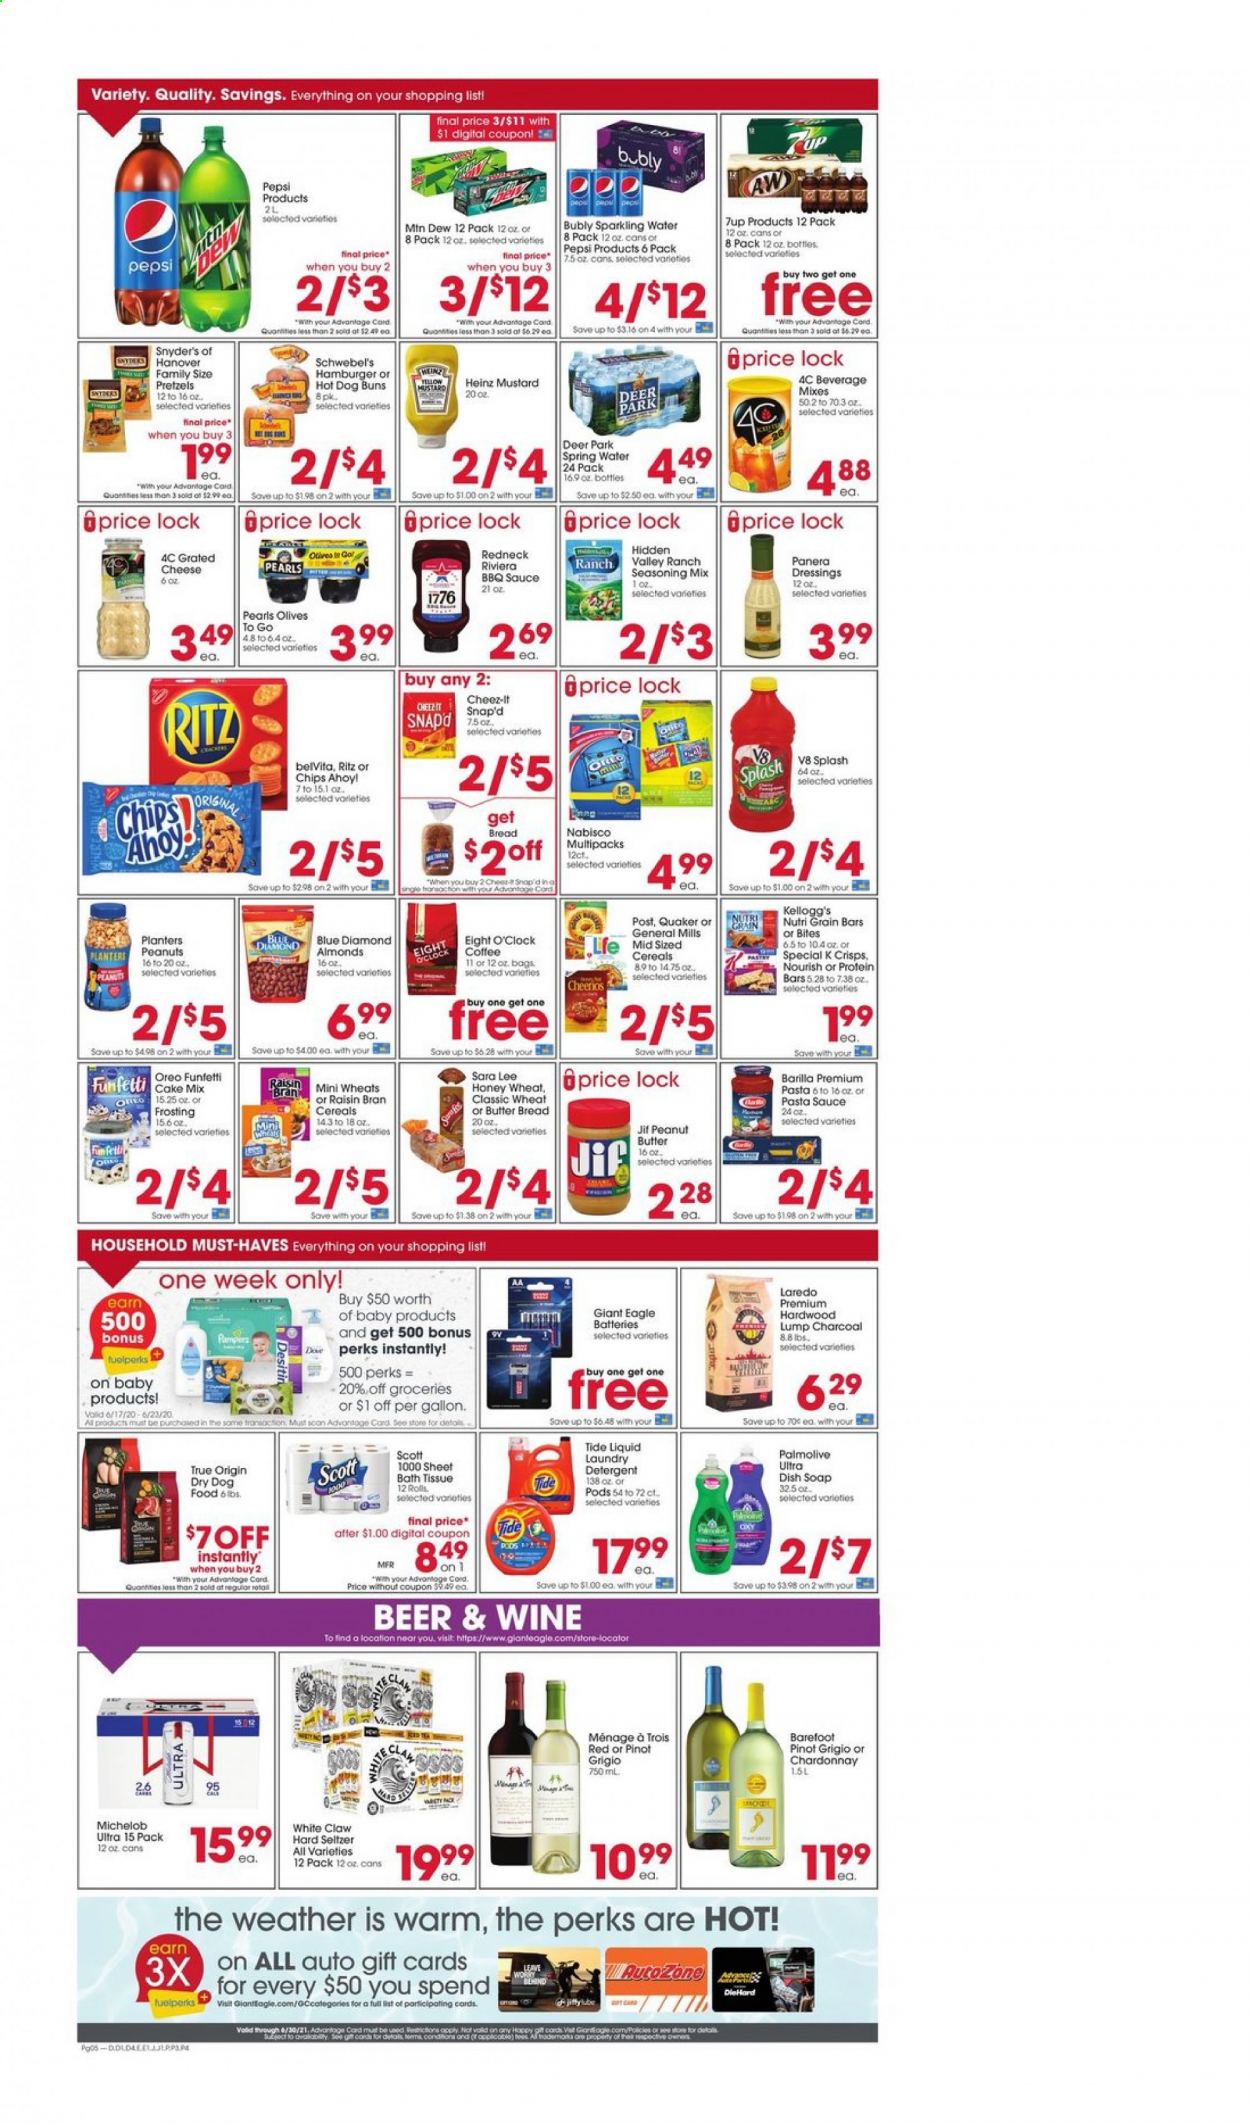 thumbnail - Giant Eagle Flyer - 06/17/2021 - 06/23/2021 - Sales products - Michelob, bread, pretzels, buns, Sara Lee, cake mix, pasta sauce, sauce, Barilla, Quaker, cheese, grated cheese, Oreo, Kellogg's, RITZ, chips, Cheez-It, frosting, Heinz, olives, cereals, Cheerios, protein bar, Raisin Bran, belVita, Nutri-Grain, spice, BBQ sauce, mustard, peanut butter, Jif, almonds, peanuts, Planters, Blue Diamond, Mountain Dew, Pepsi, 7UP, spring water, sparkling water, coffee, L'Or, Eight O'Clock, white wine, Chardonnay, Pinot Grigio, White Claw, Hard Seltzer, beer, Pampers, bath tissue, detergent, Tide, laundry detergent, Palmolive, soap, gallon, battery, animal food, dog food, dry dog food, charcoal, Desitin. Page 4.